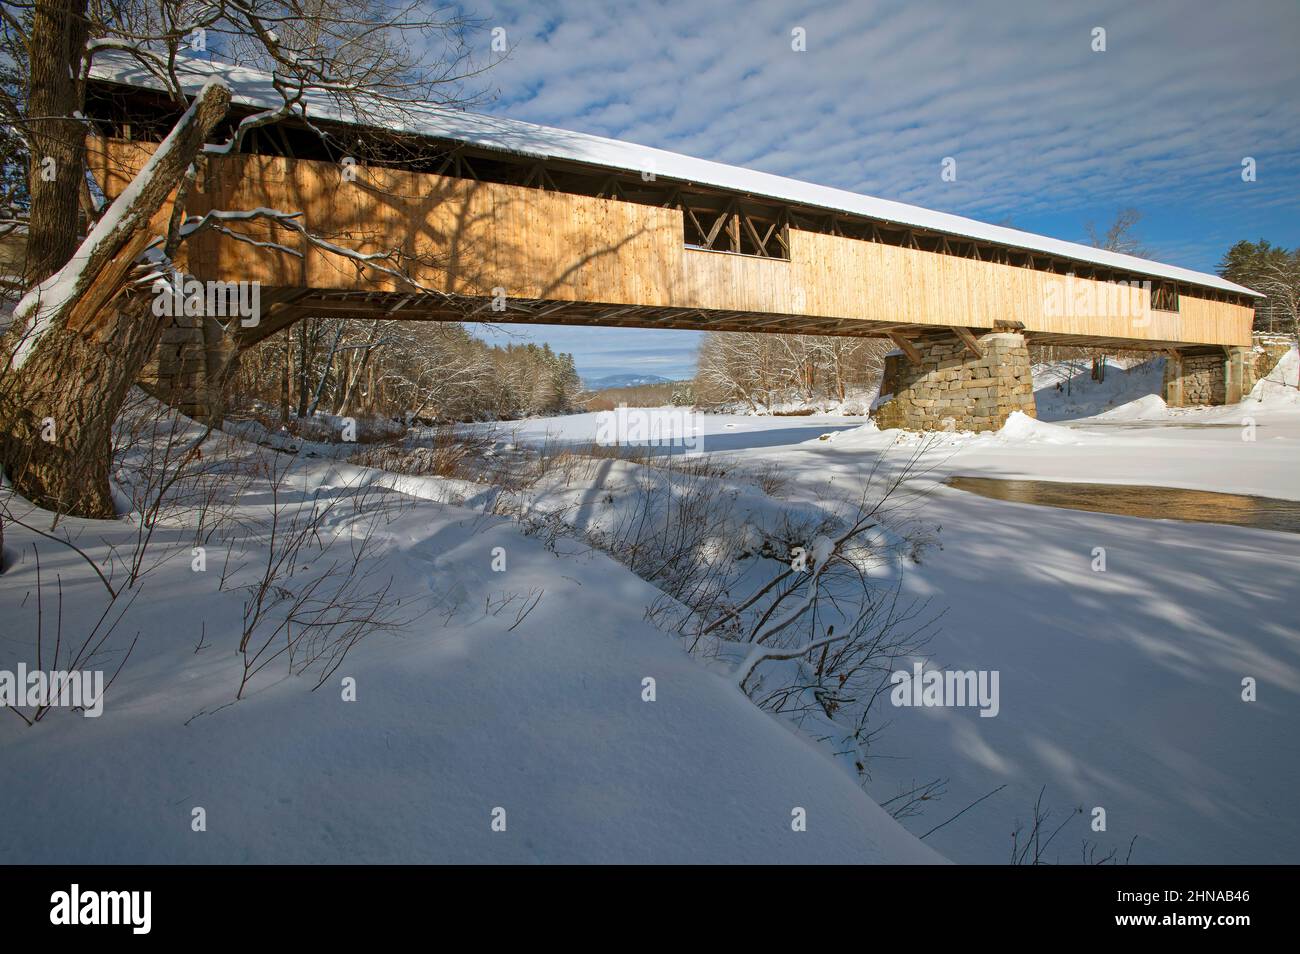 The Blair Covered Bridge (1869) in Campton, New Hampshire, USA on a Winter's Day Stock Photo